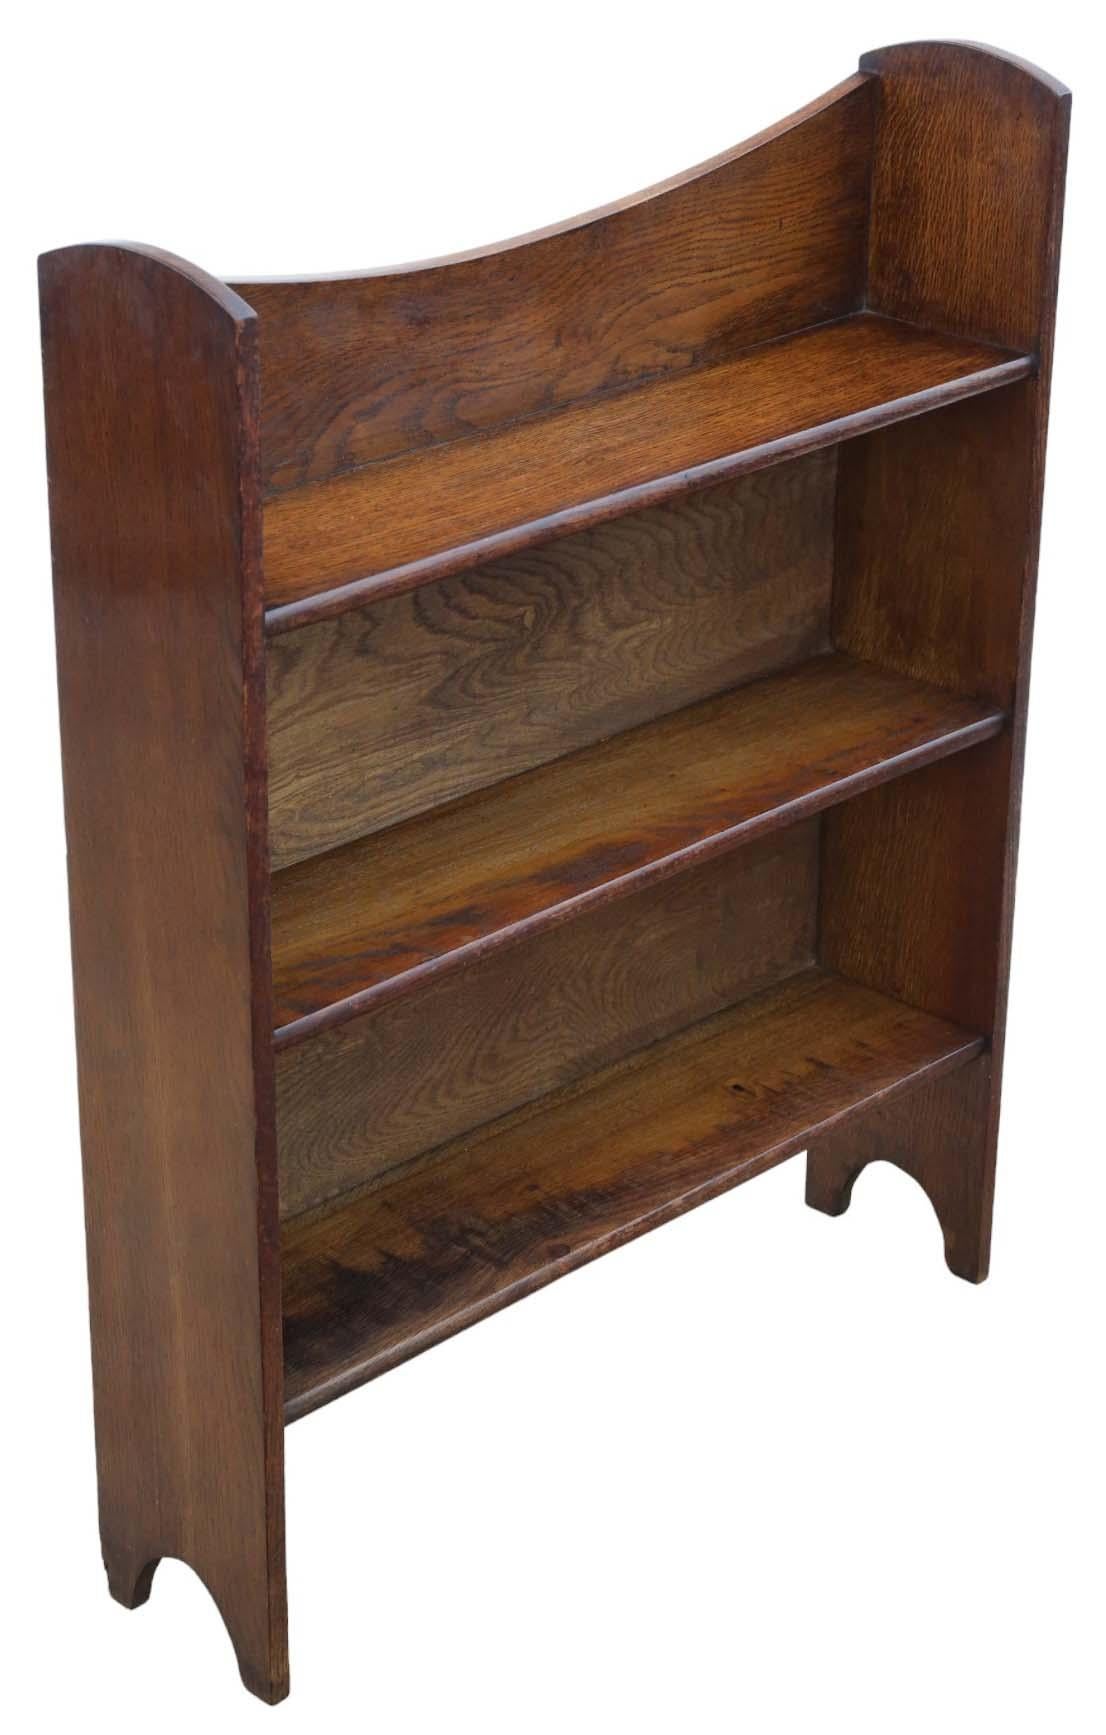 Antique Oak Bookcase Display Cabinet - Quality Piece from the Art Nouveau era, circa 1910.

This bookcase emanates timeless charm and character.

Solidly constructed with no loose joints or woodworm, it ensures durability and stability.

Certain to